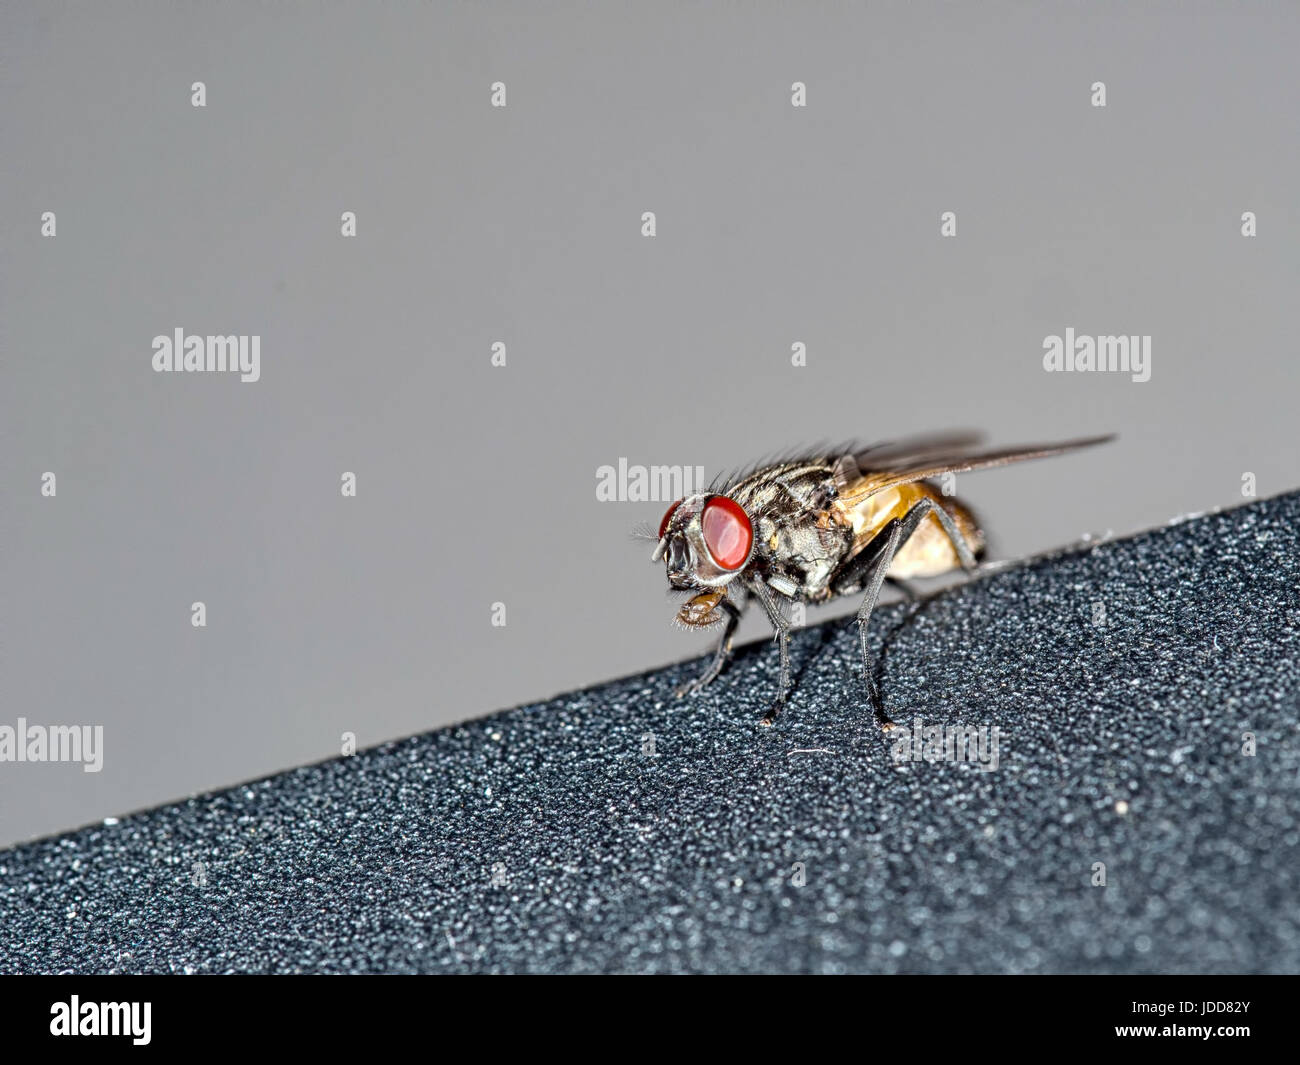 There's a fly on my laptop.... Detailed shot. Profile.Housefly. Stock Photo